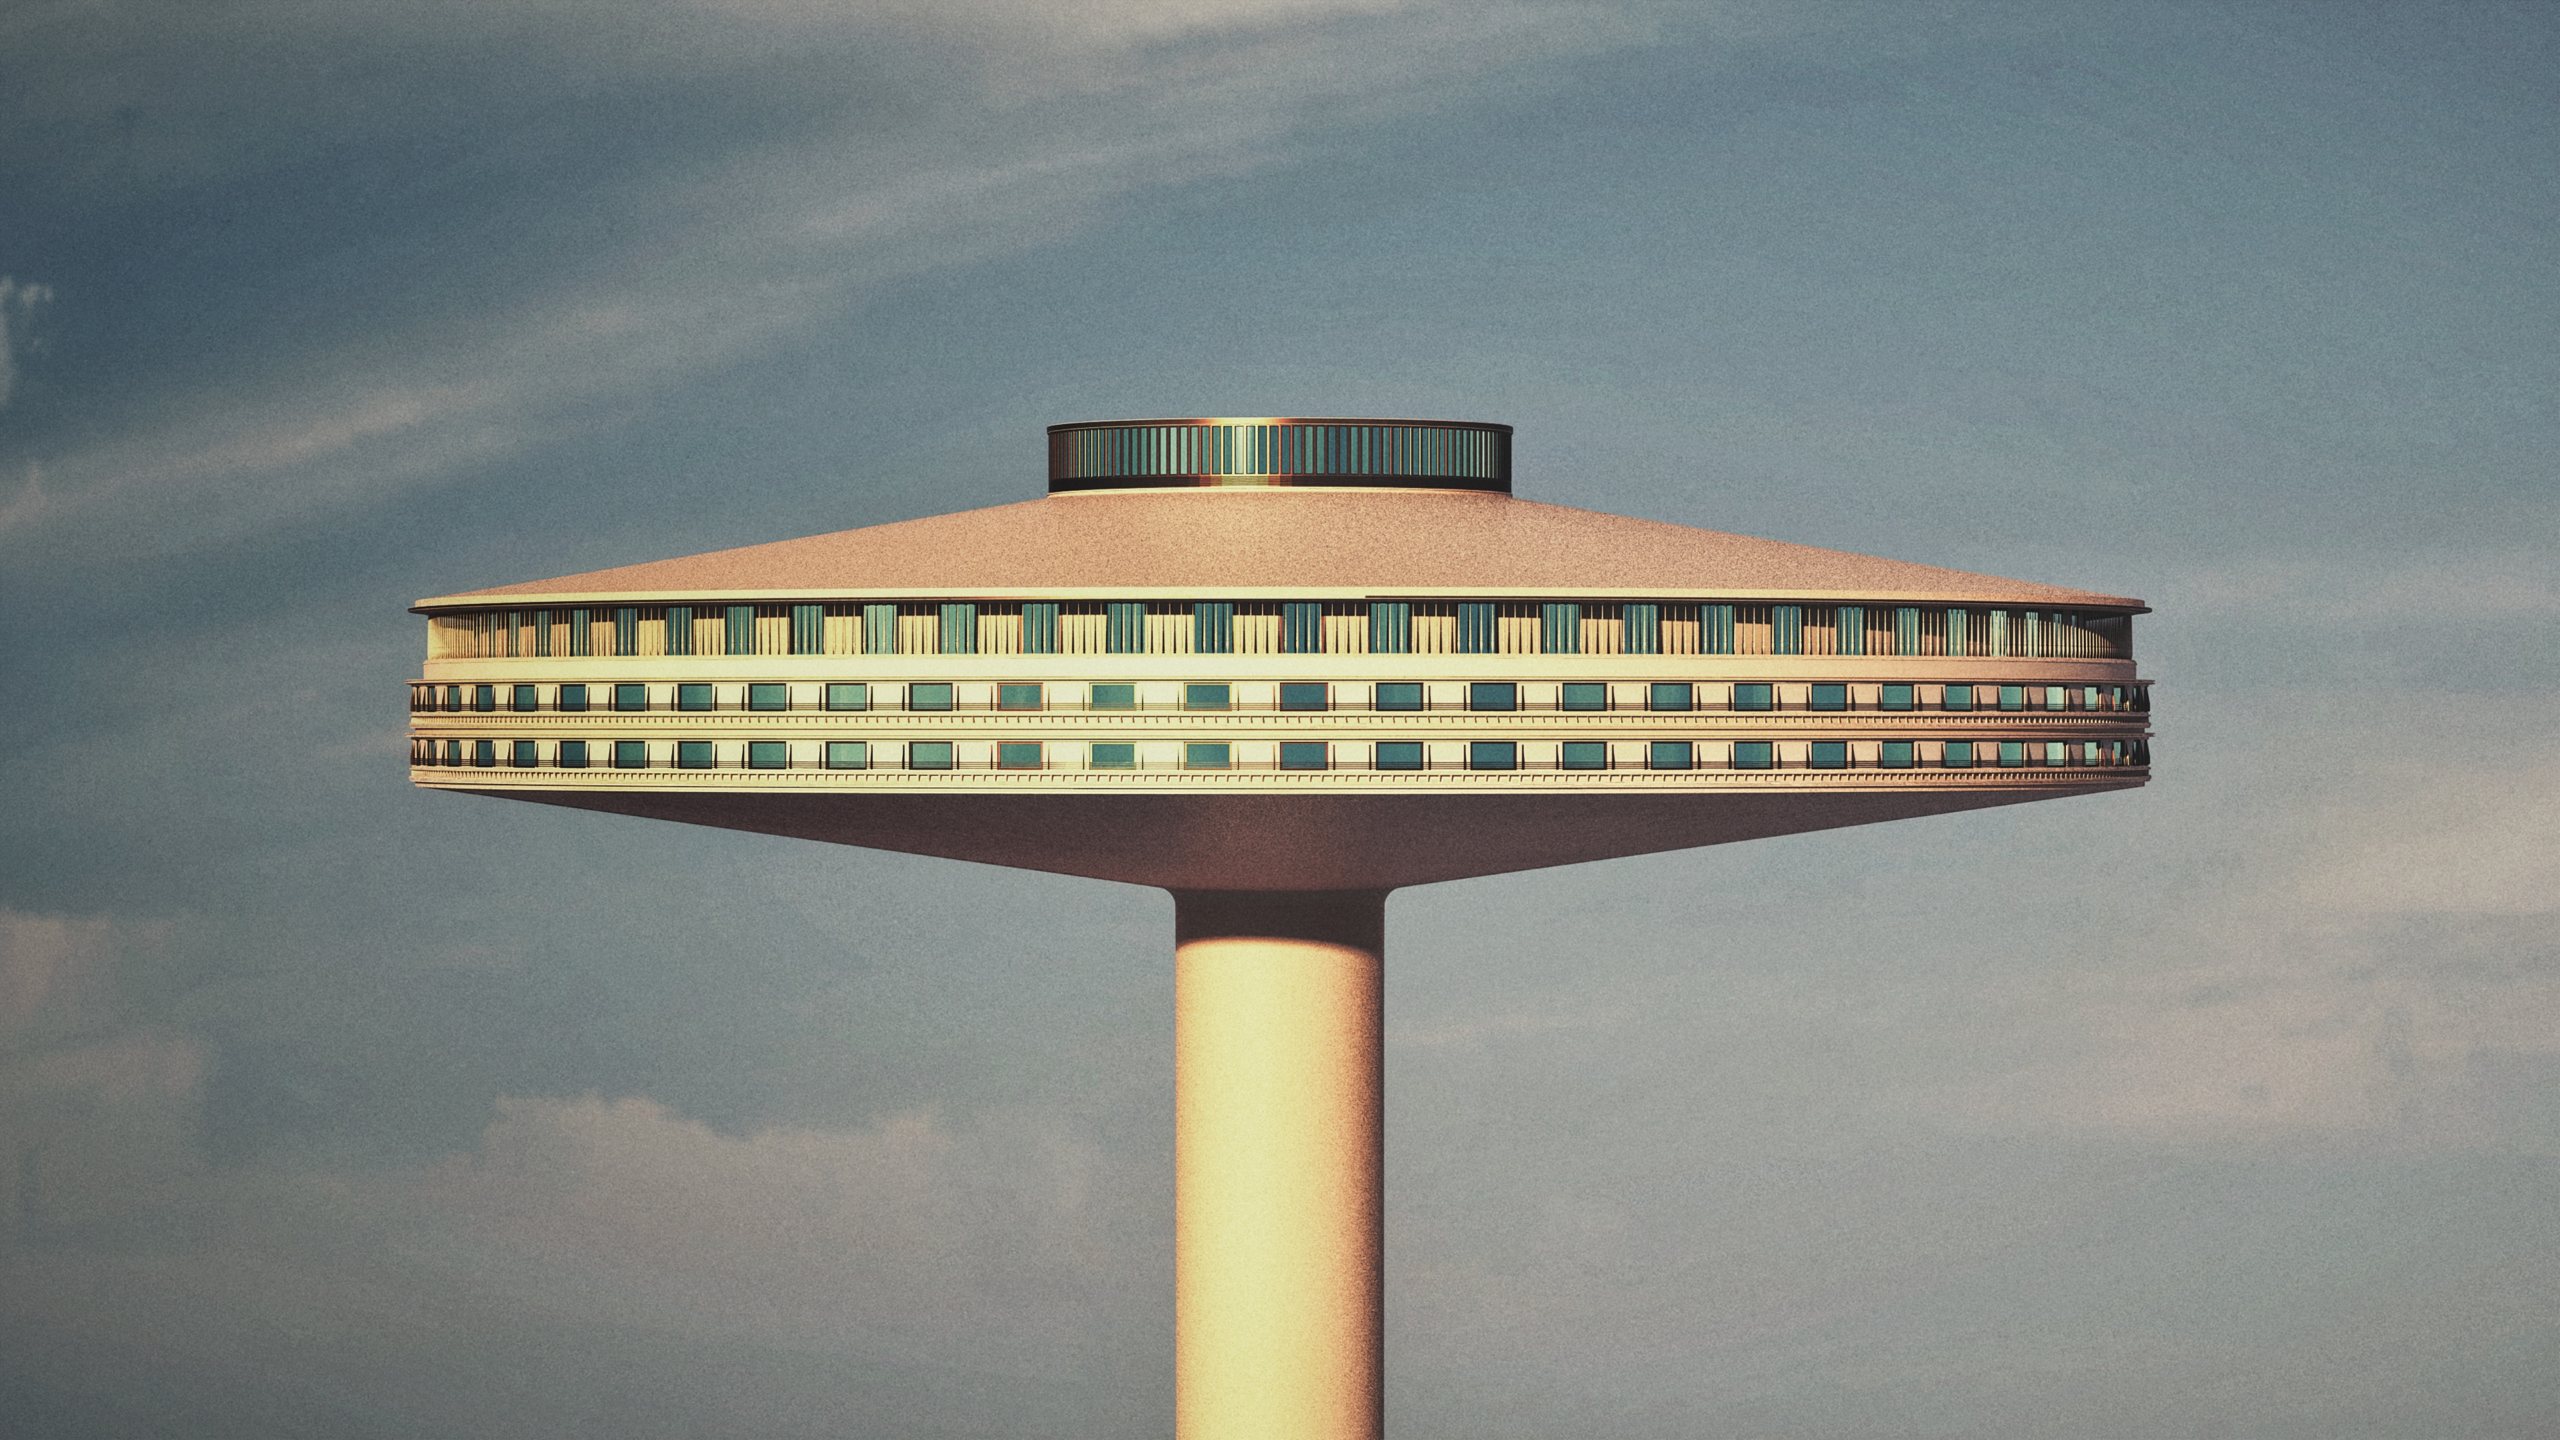 3D rendering of surreal architecture